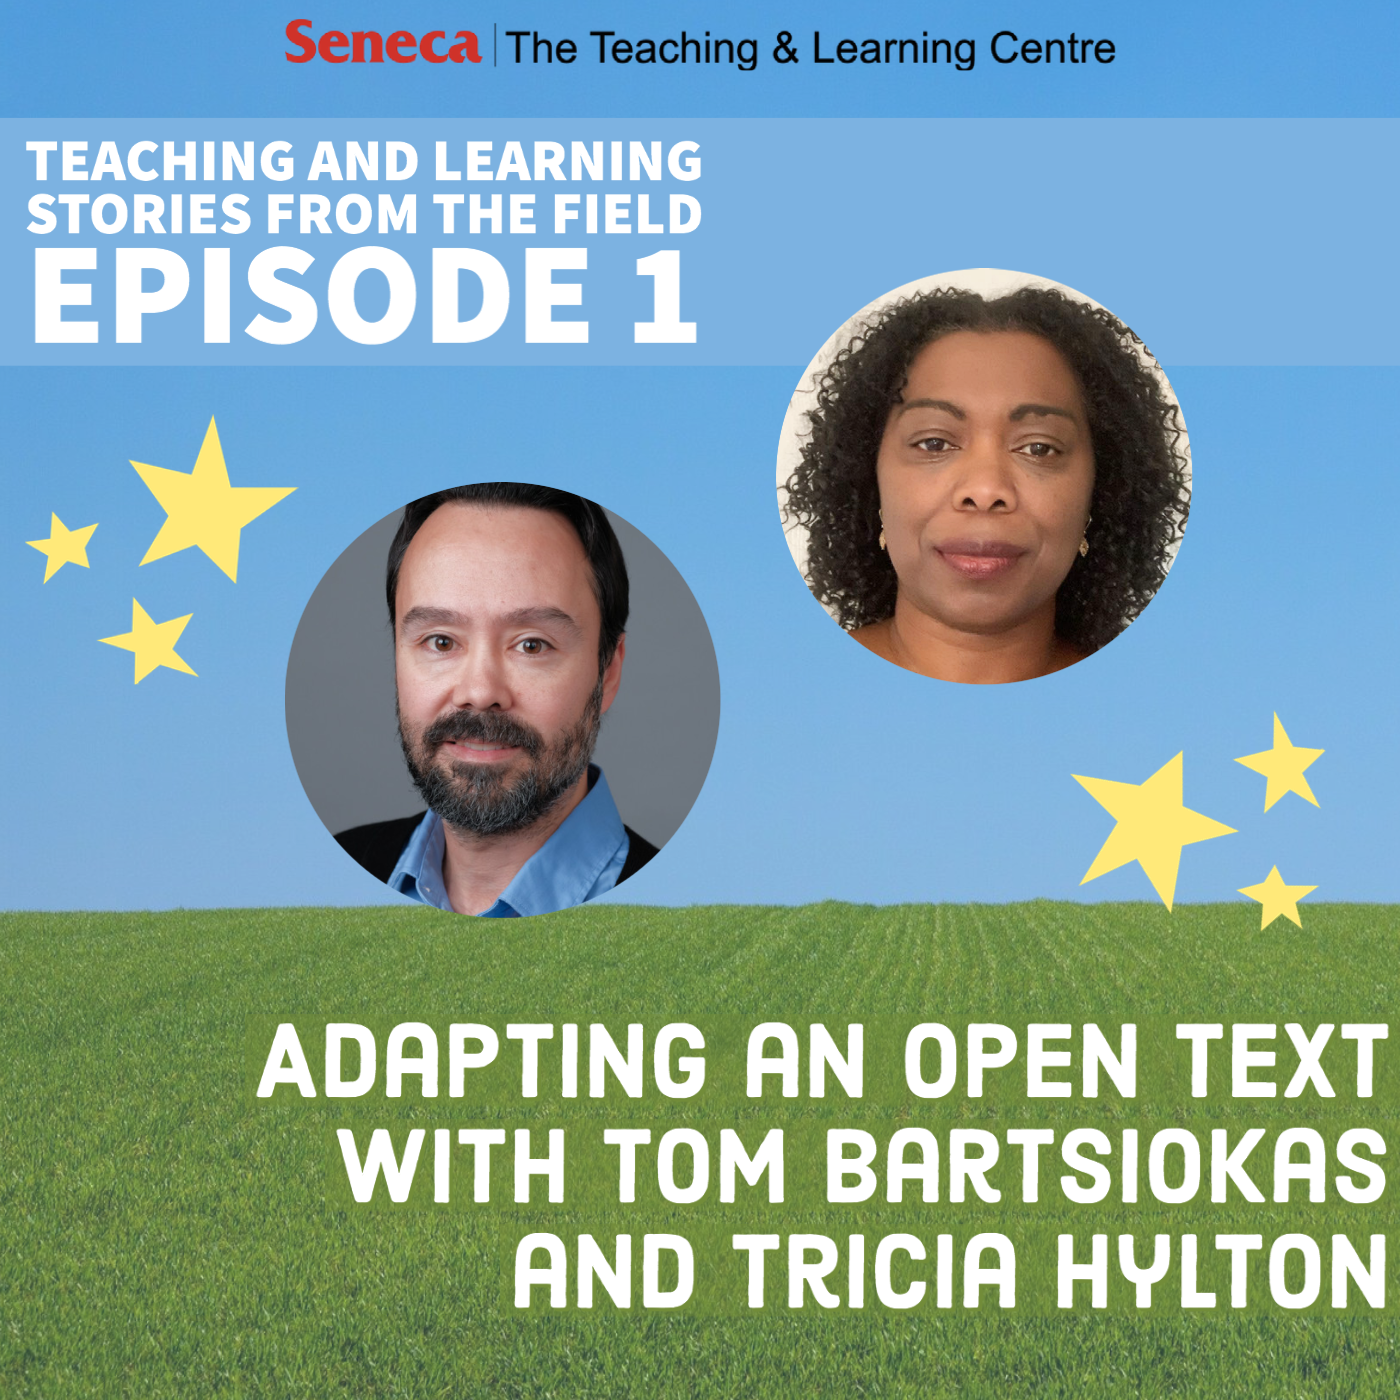 Episode 1 of the Teaching and Learning Stories podcast is called Adapting an Open Text with Tom Bartsiokas and Tricia Hylton